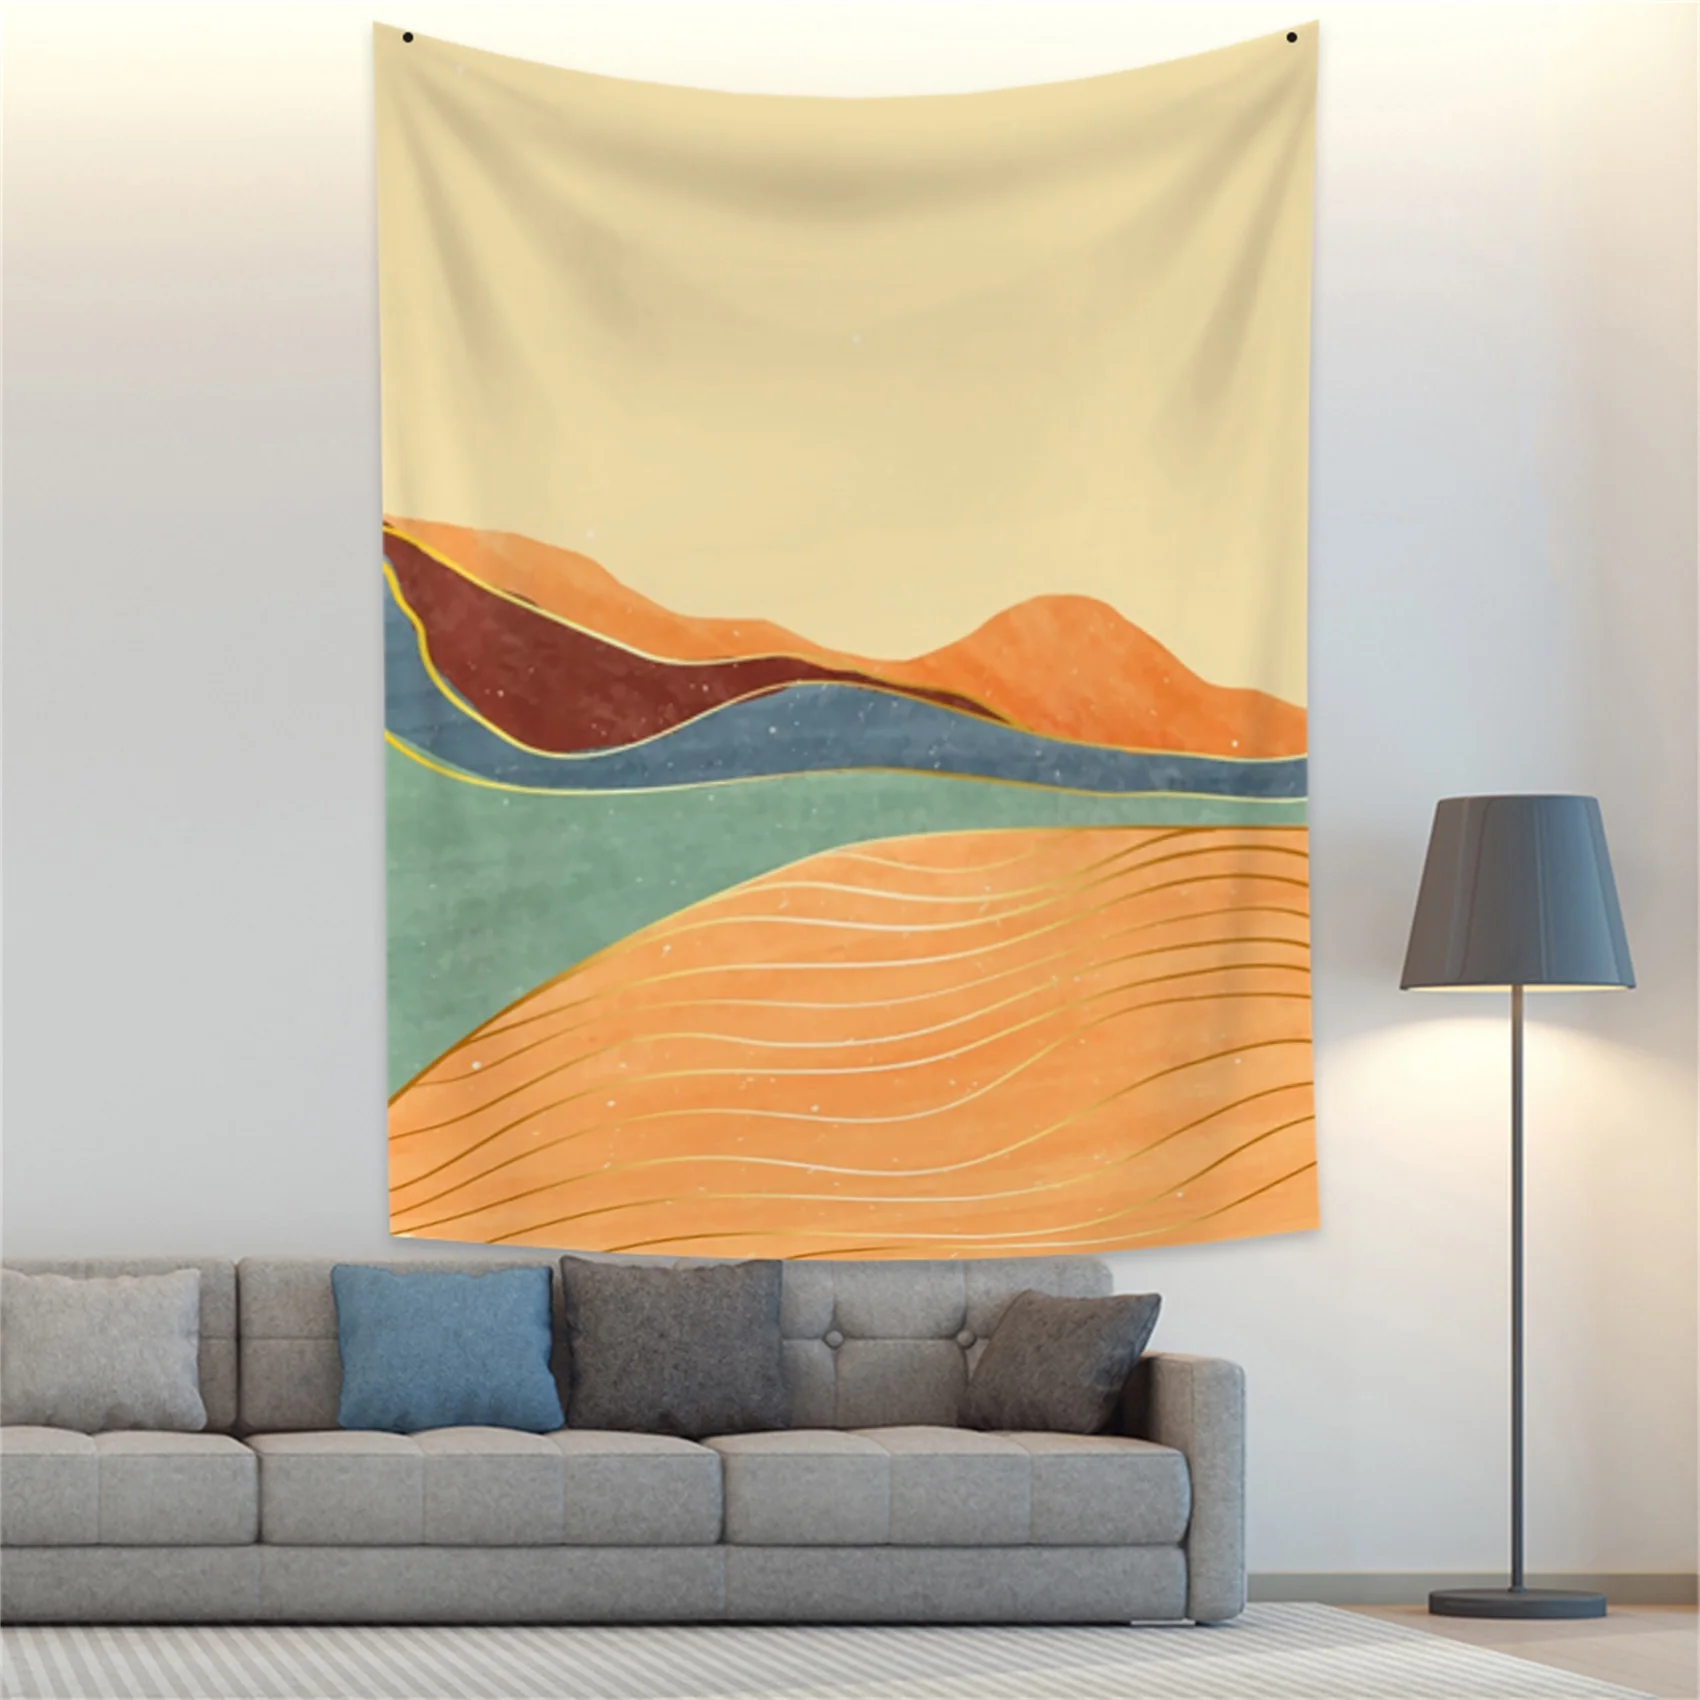 

Bohemian Art Wall Tapestry Mountains Golden Lines Print Microfiber Fabric Corridor Hotel Living Room Bedroom Home Decoration